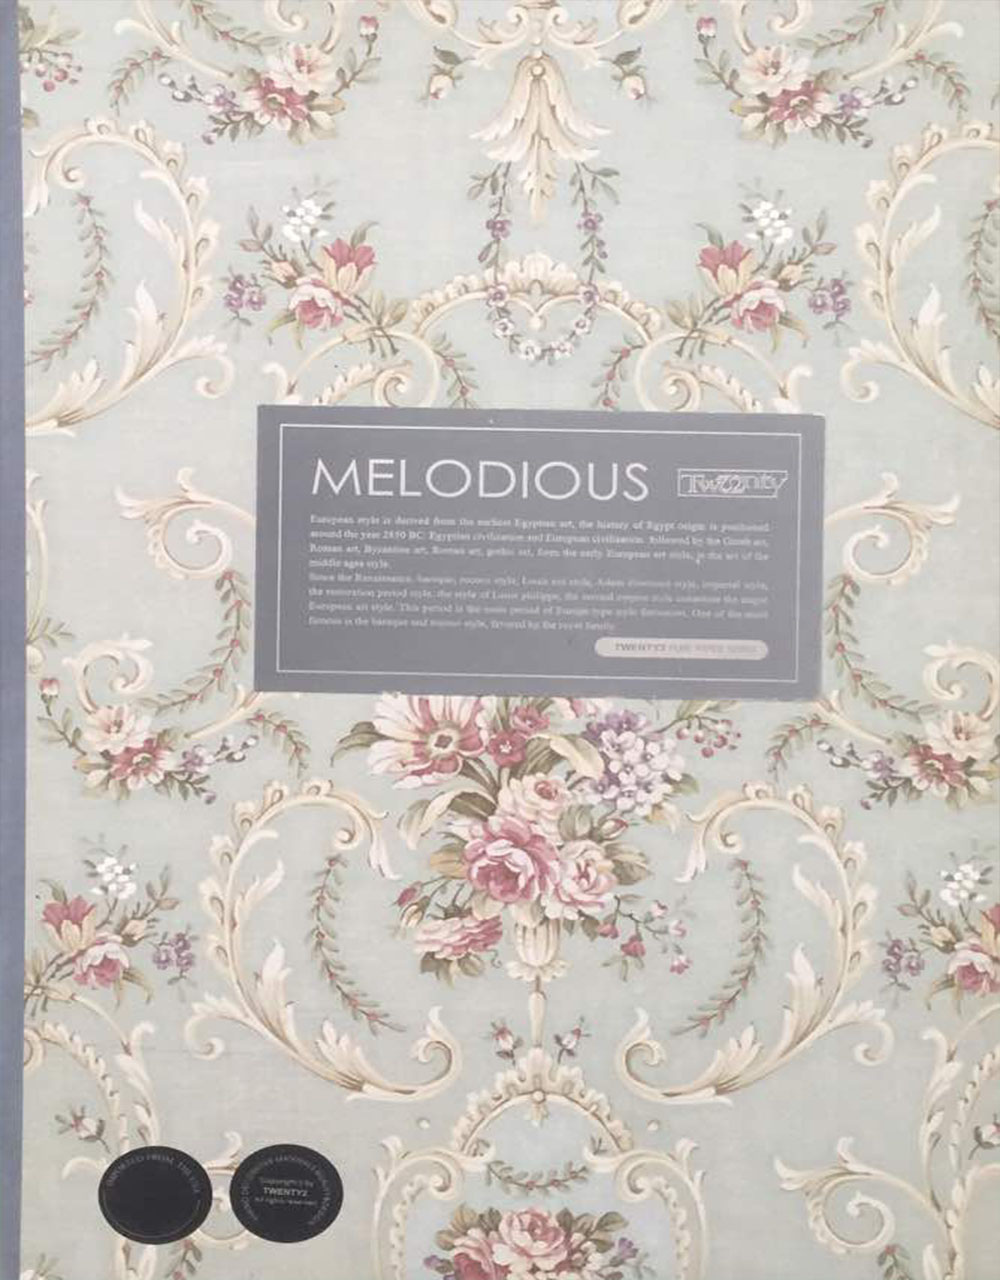 MELODIOUS